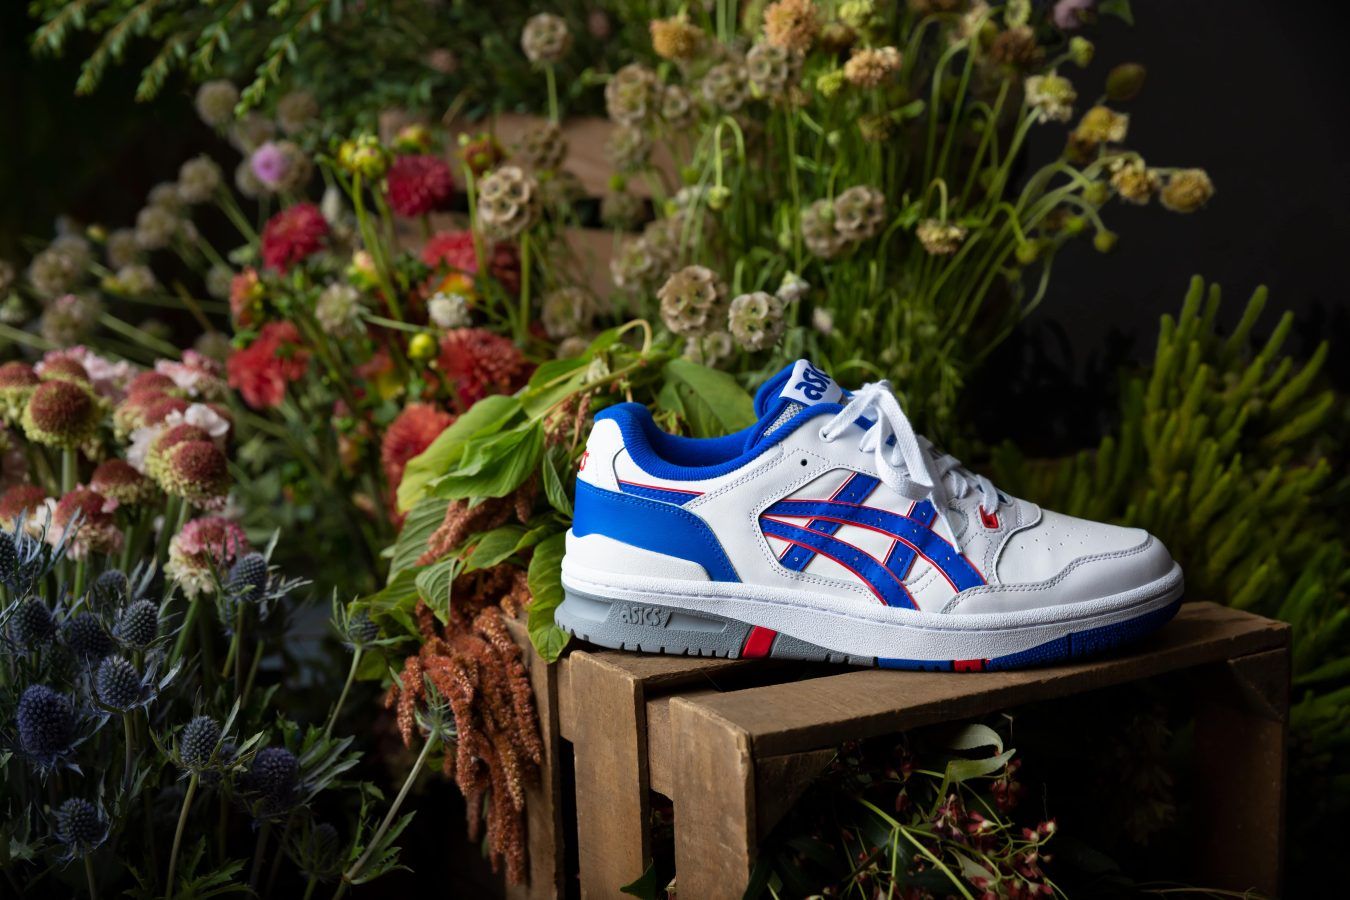 ASICS EX89 takes us on a vibrant trip from the b-ball court to the streets